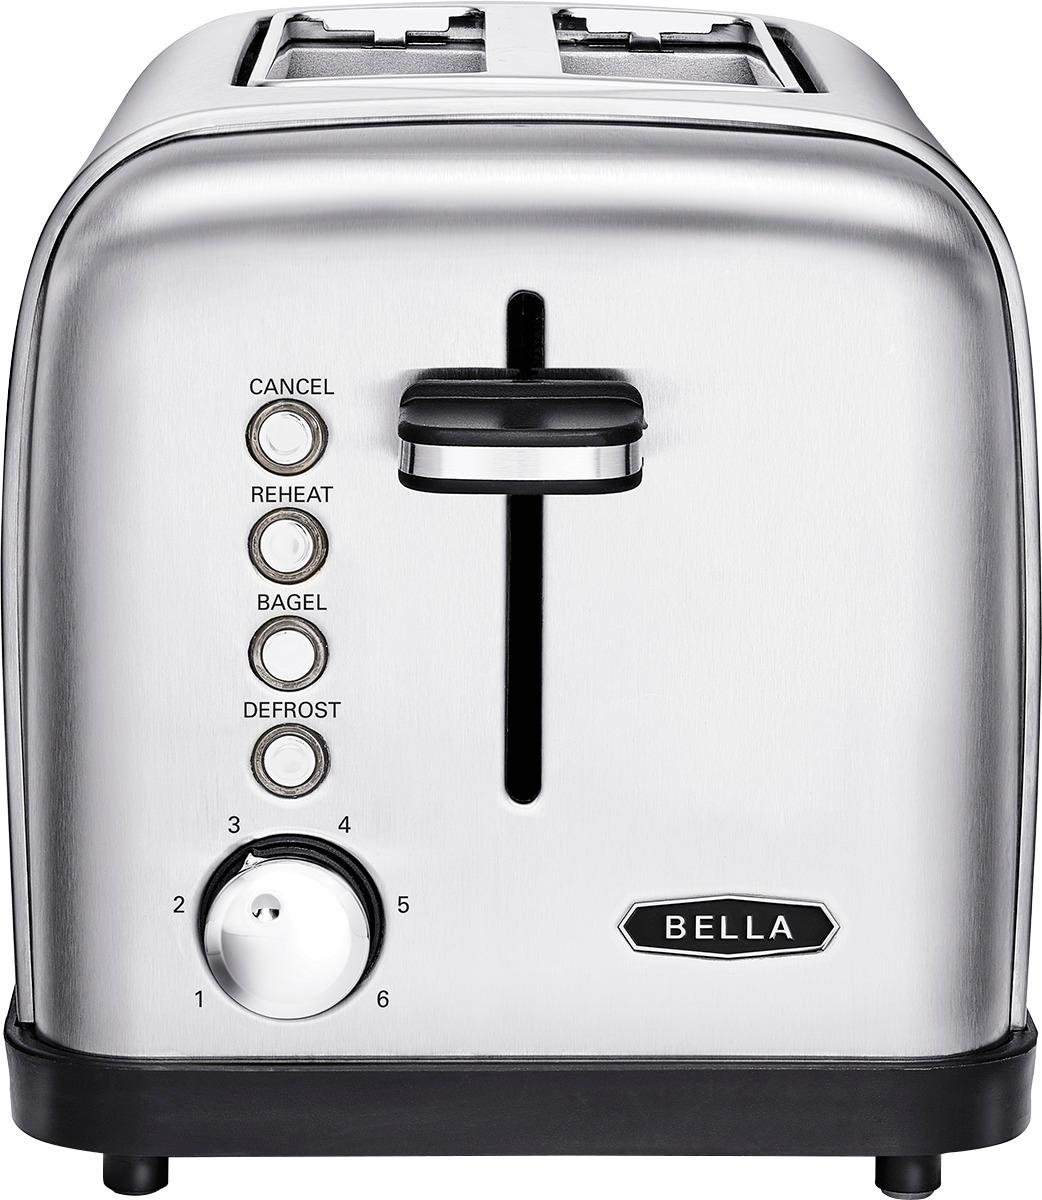 Bella – Classics 2-Slice Wide-Slot Toaster – Stainless Steel – Just $27.99 at Best Buy